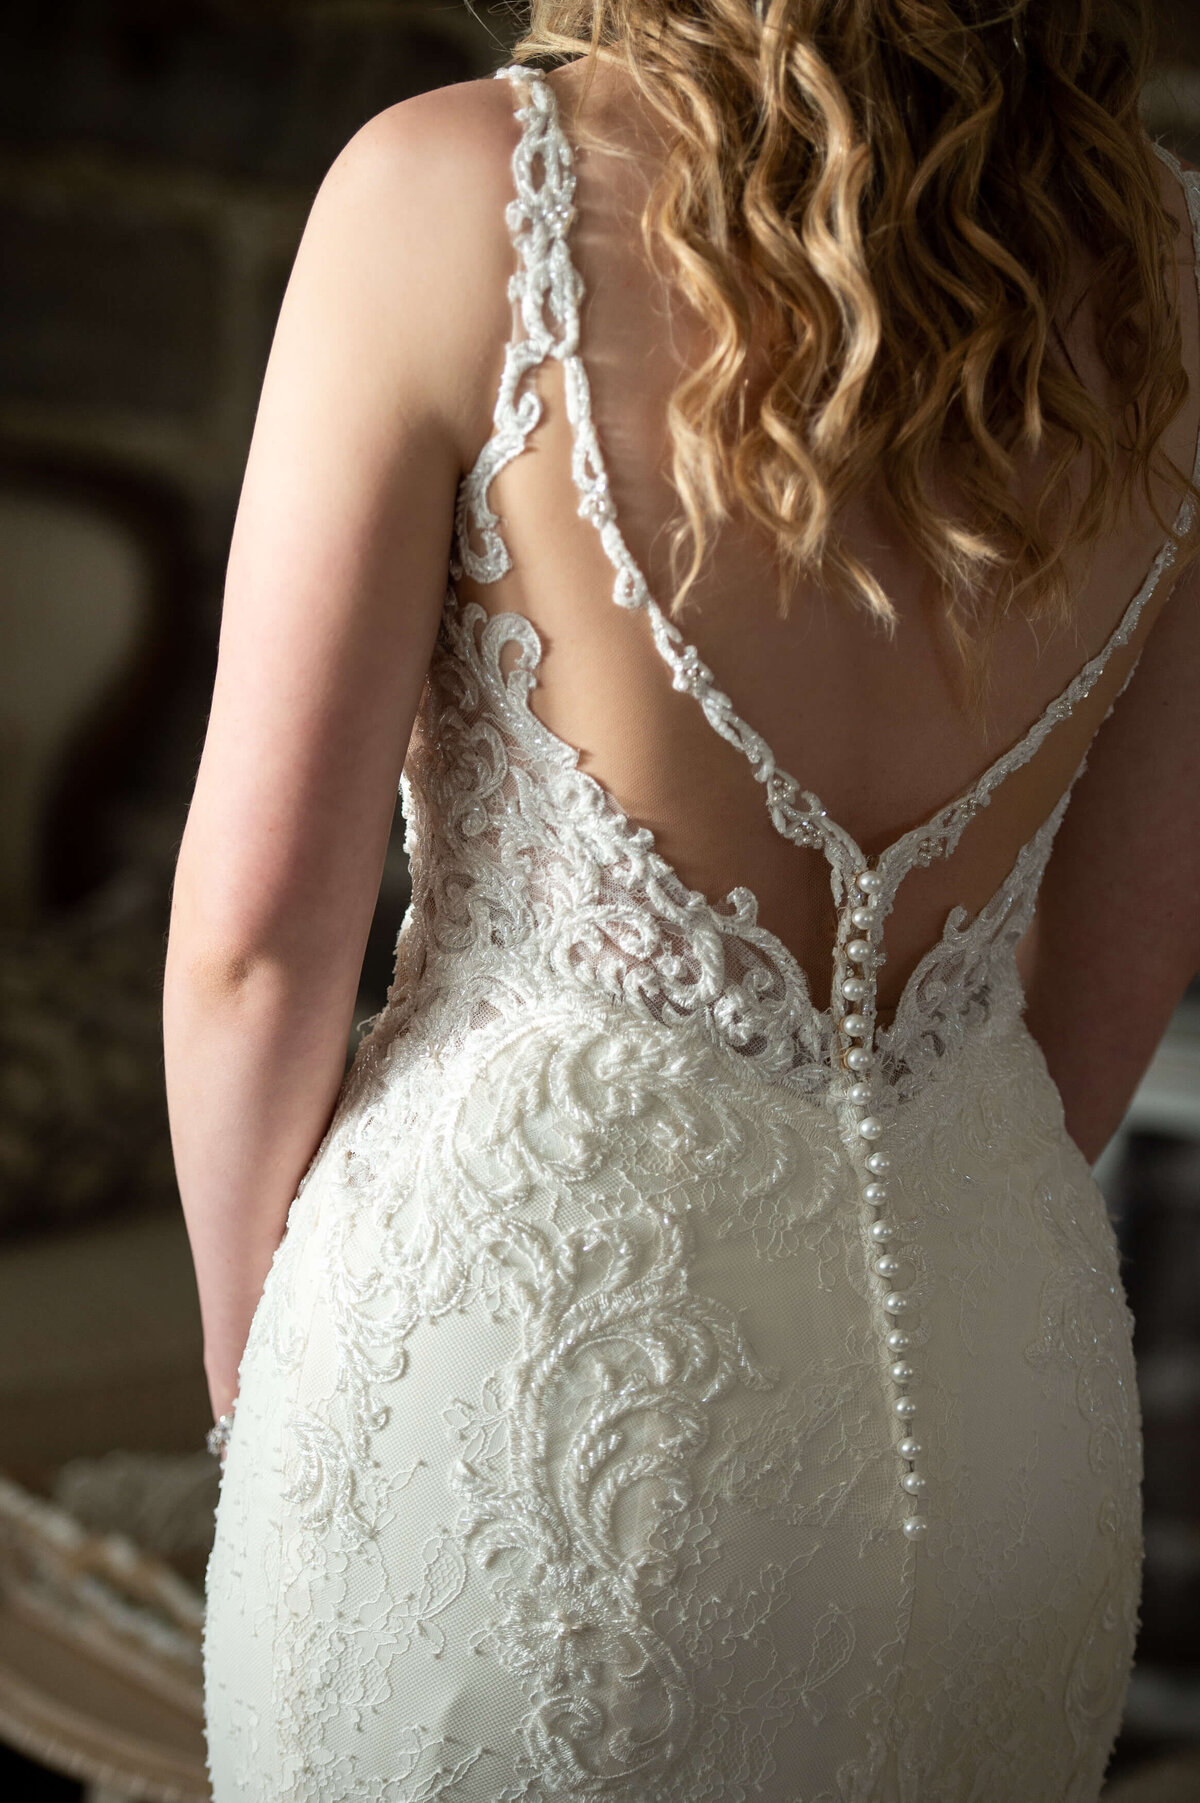 Ottawa wedding photography showing the back details of a wedding gown